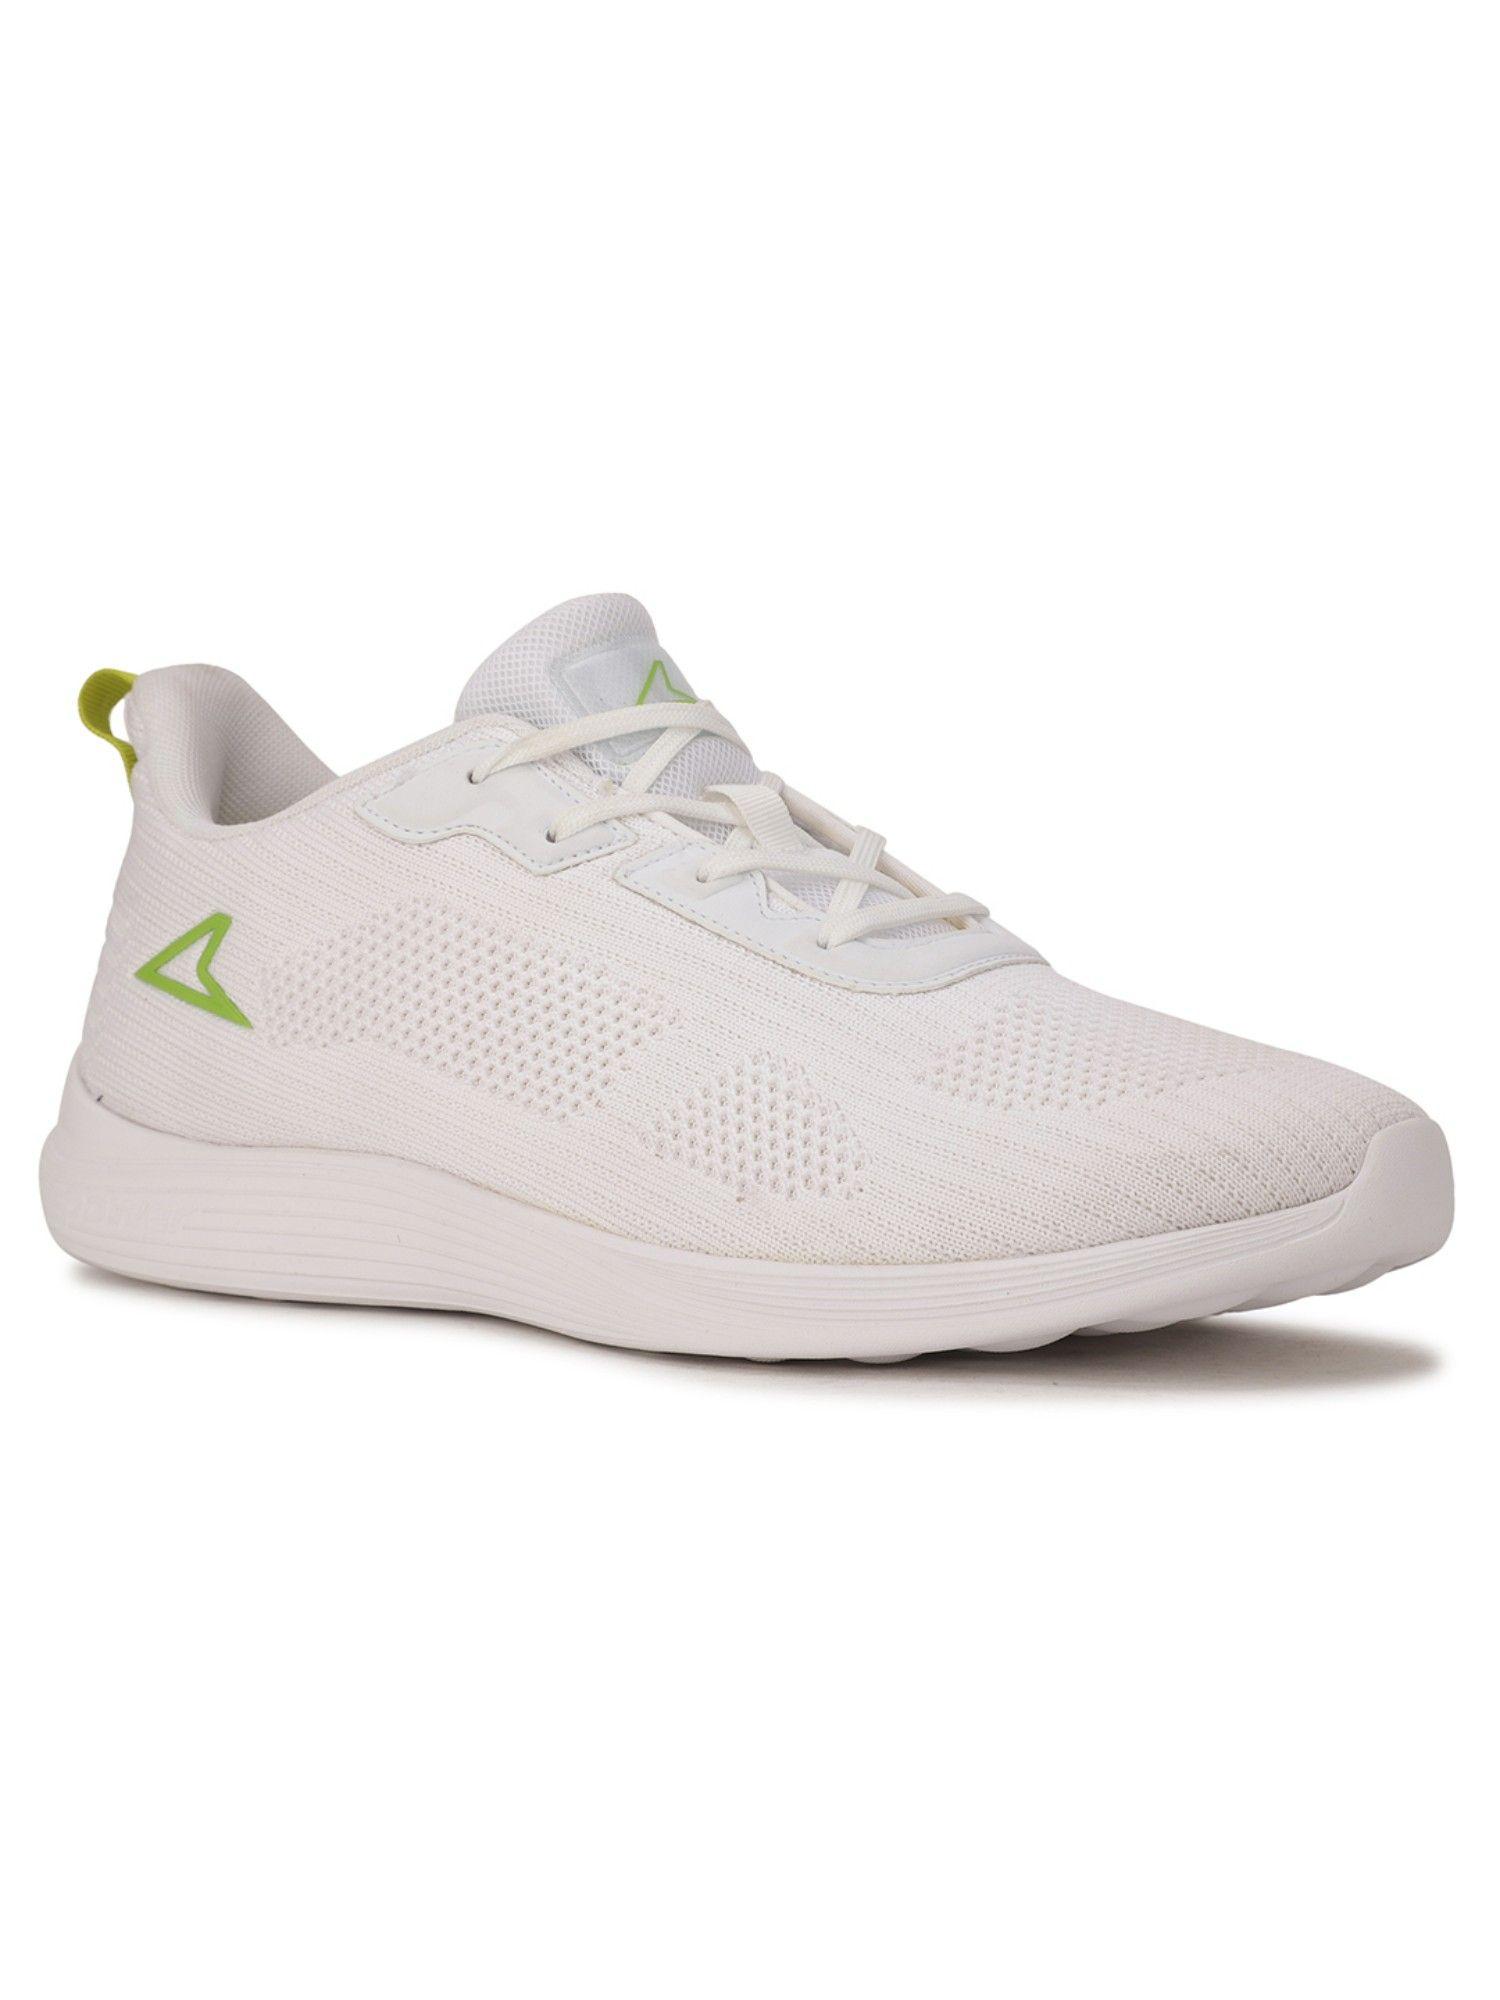 training-&-gym-shoes-for-men-(white)